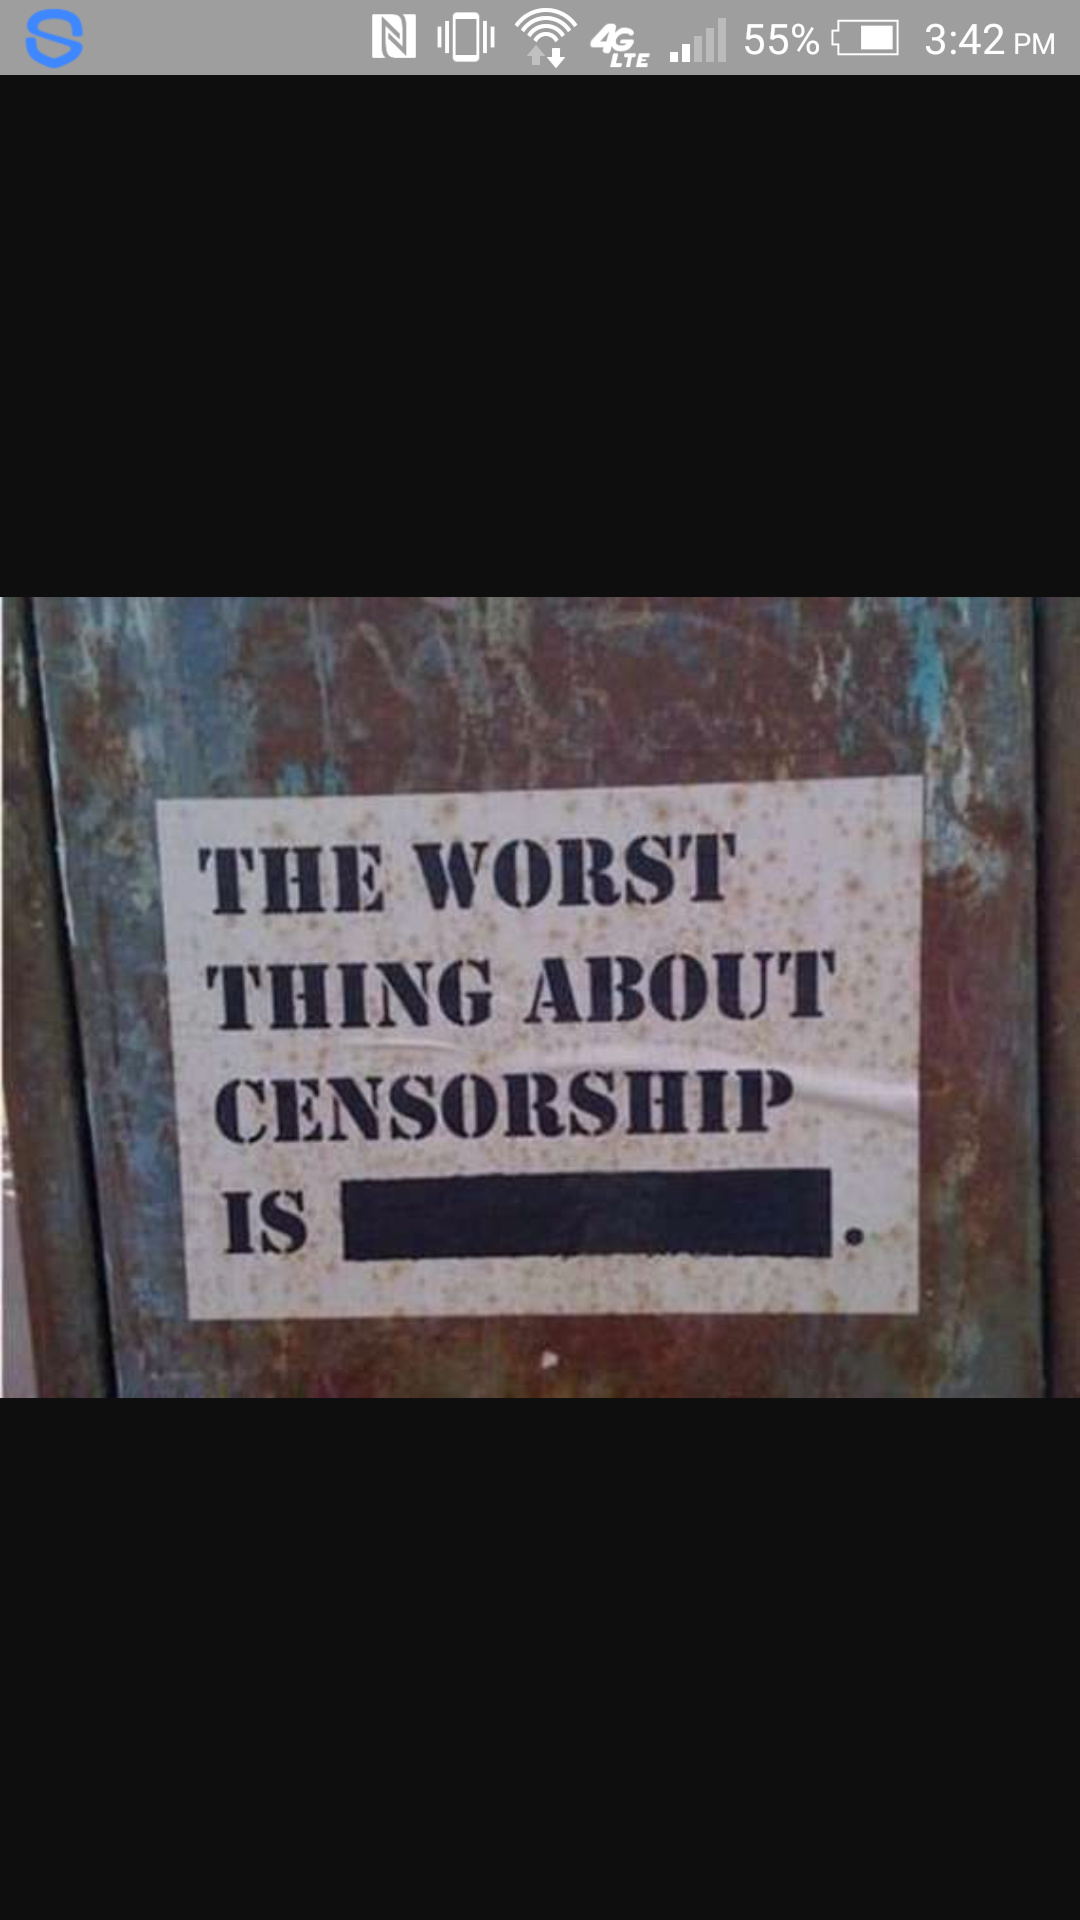 Additionally, the best thing about censorship is ********! - meme